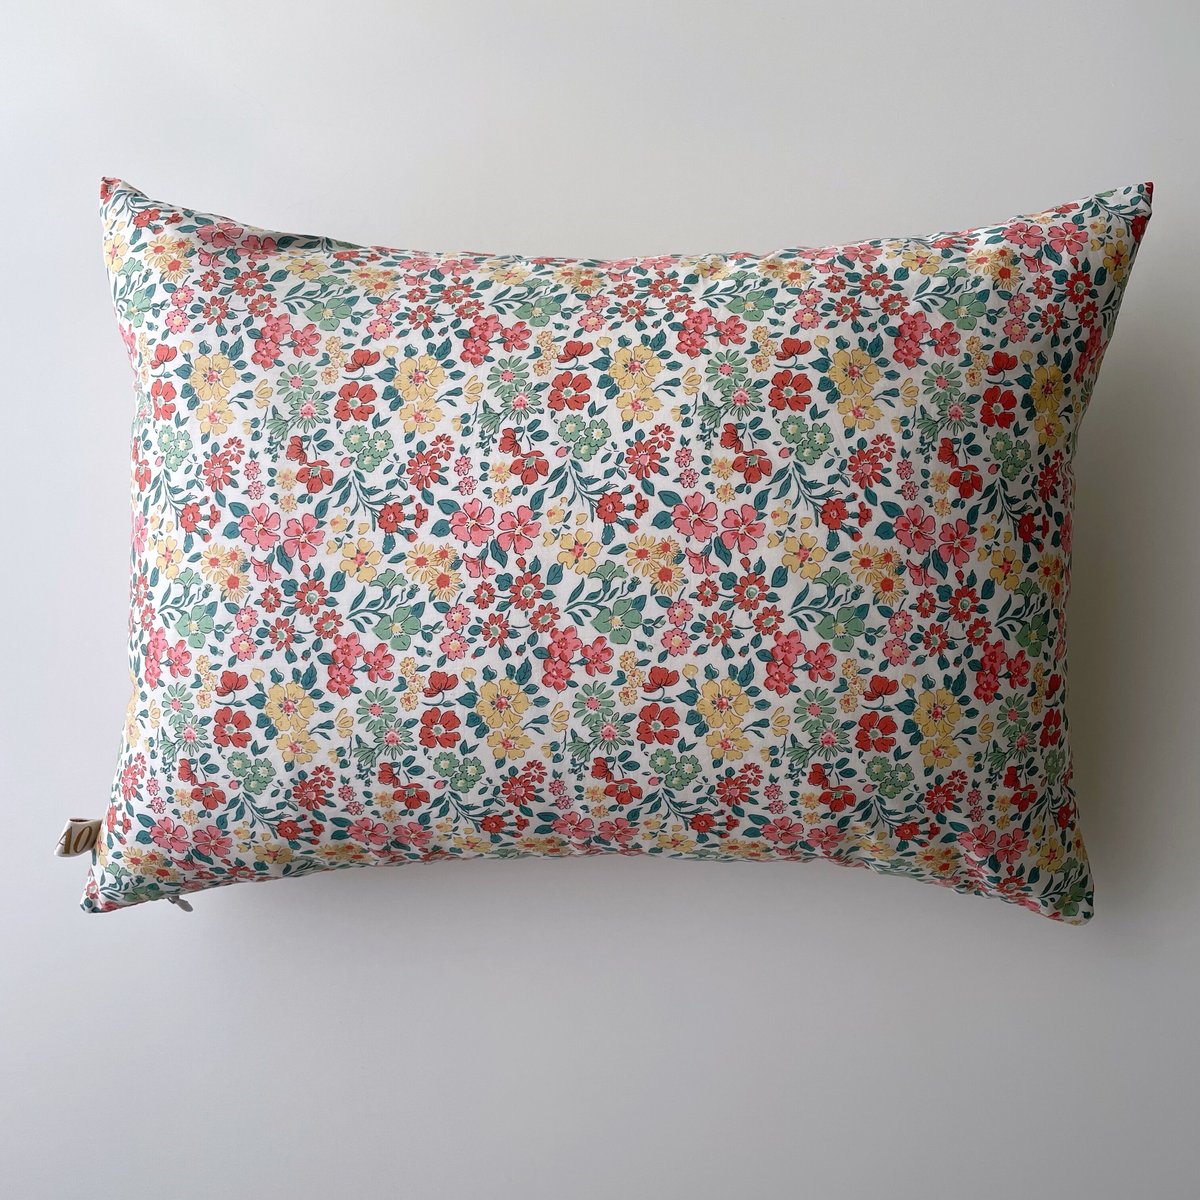 Embroidered cushion LOVE - yellow